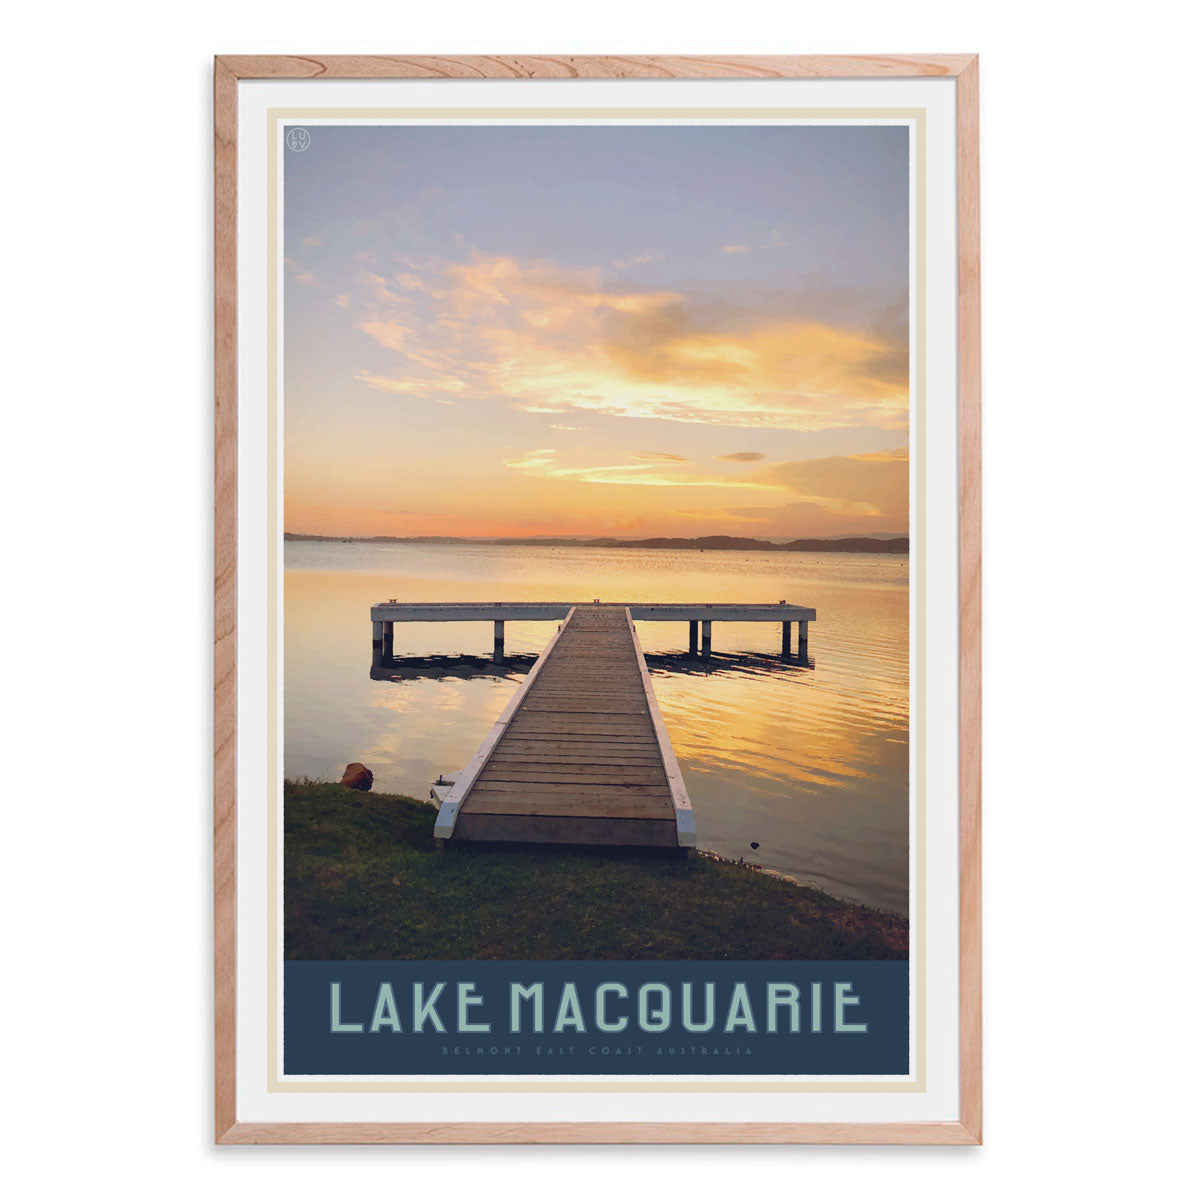 Lake Macquarie vintage travel style oak framed print by places we luv 